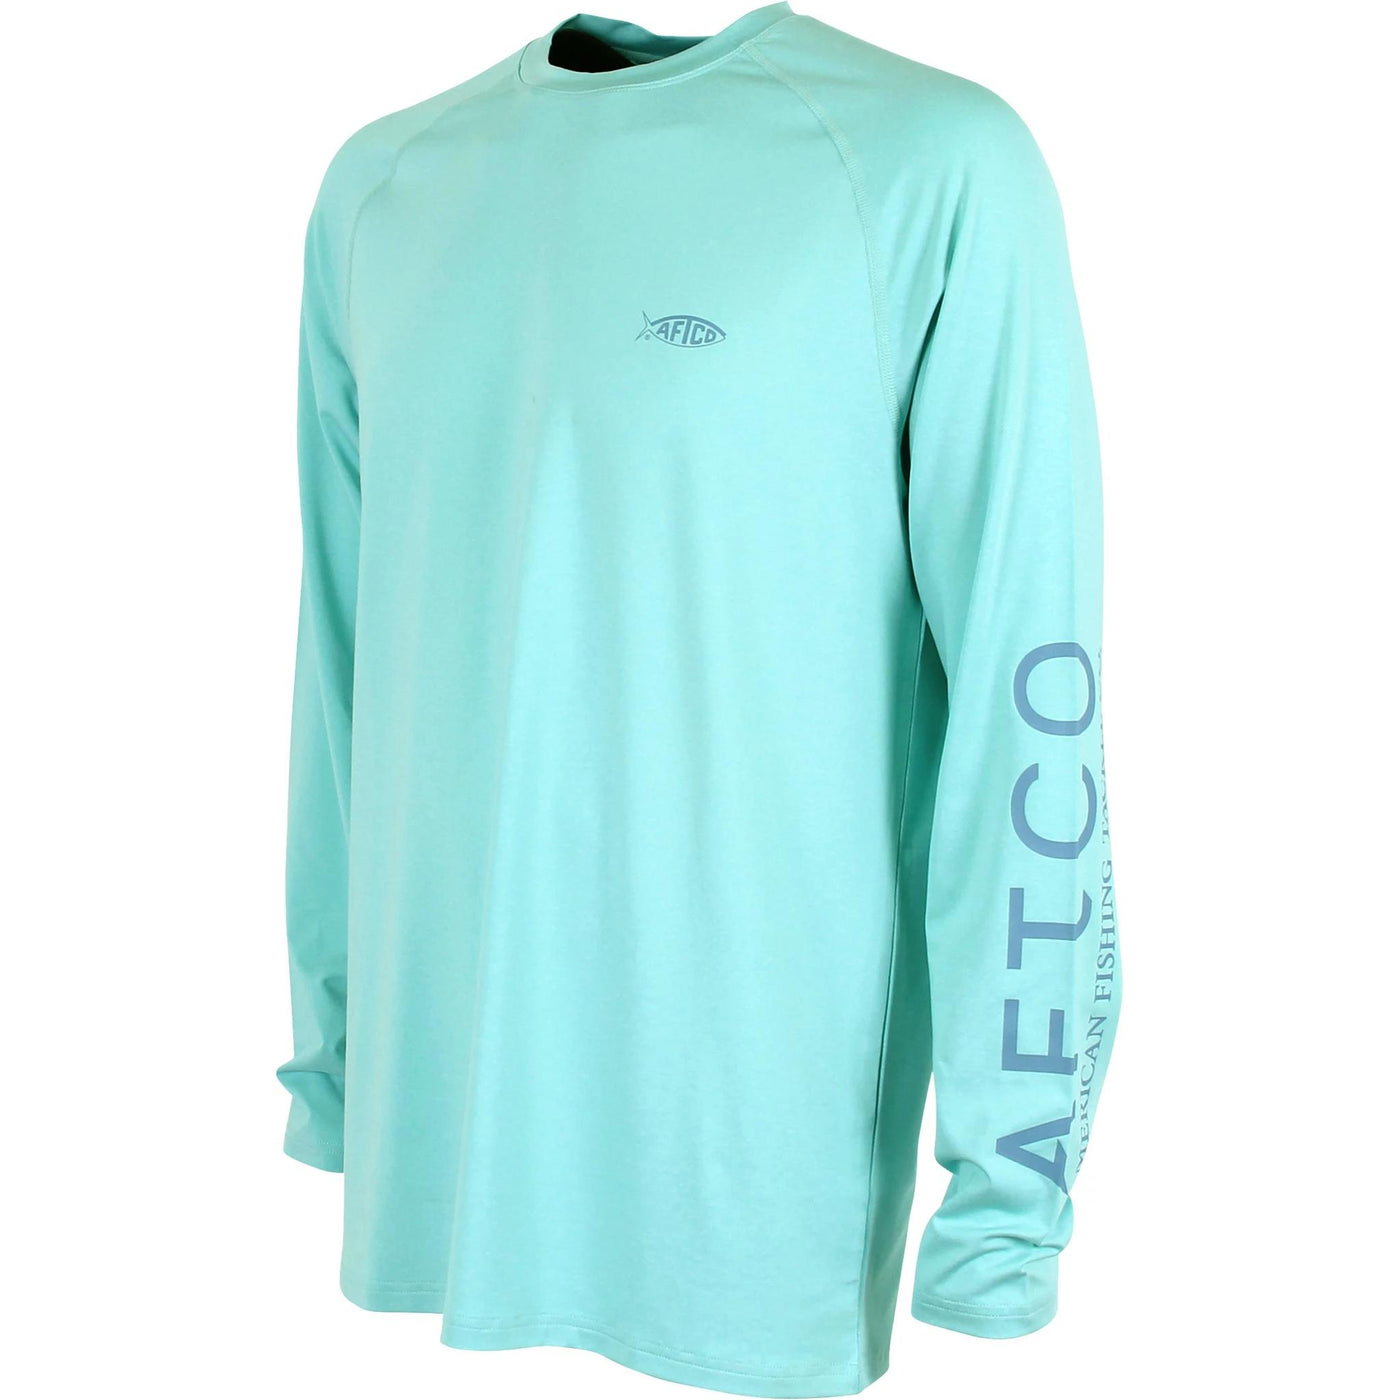 Aftco Samurai Performance Shirt-MENS CLOTHING-Bahama-S-Kevin's Fine Outdoor Gear & Apparel